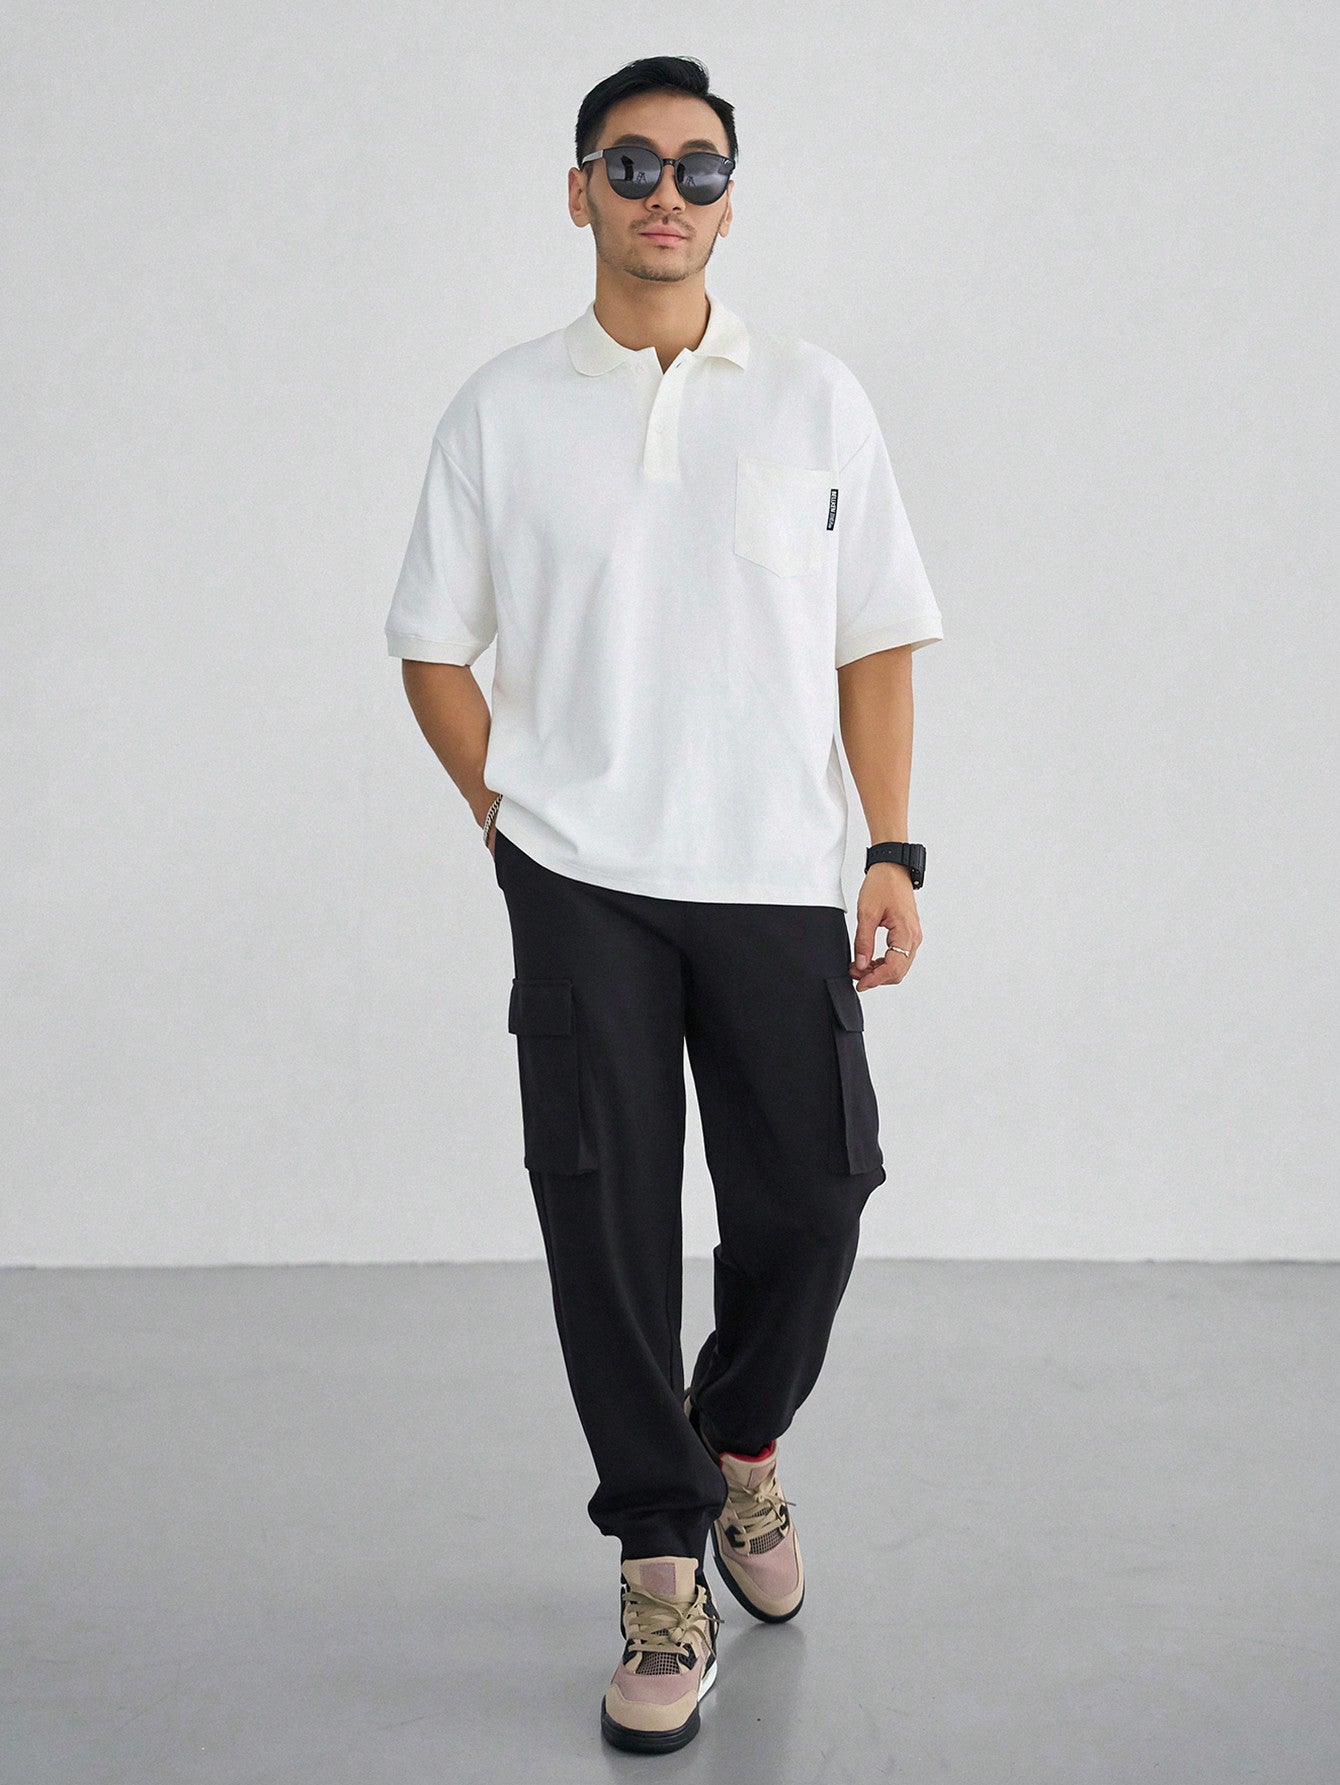 Kpop Men's Workwear Pants With Pockets And Drawstring Waist